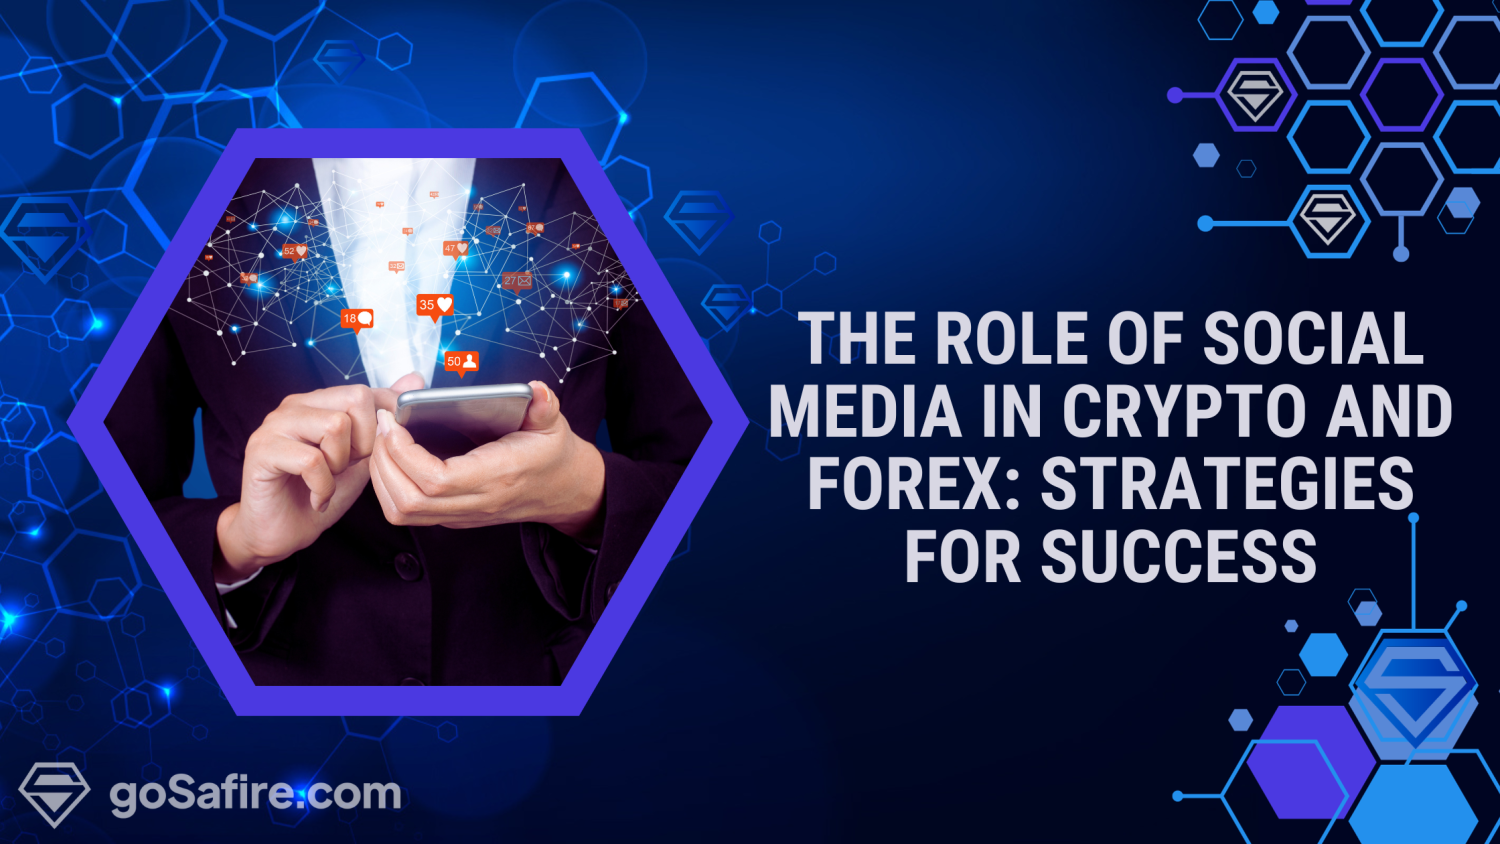 The Role of Social Media in Crypto and Forex: Strategies for Success